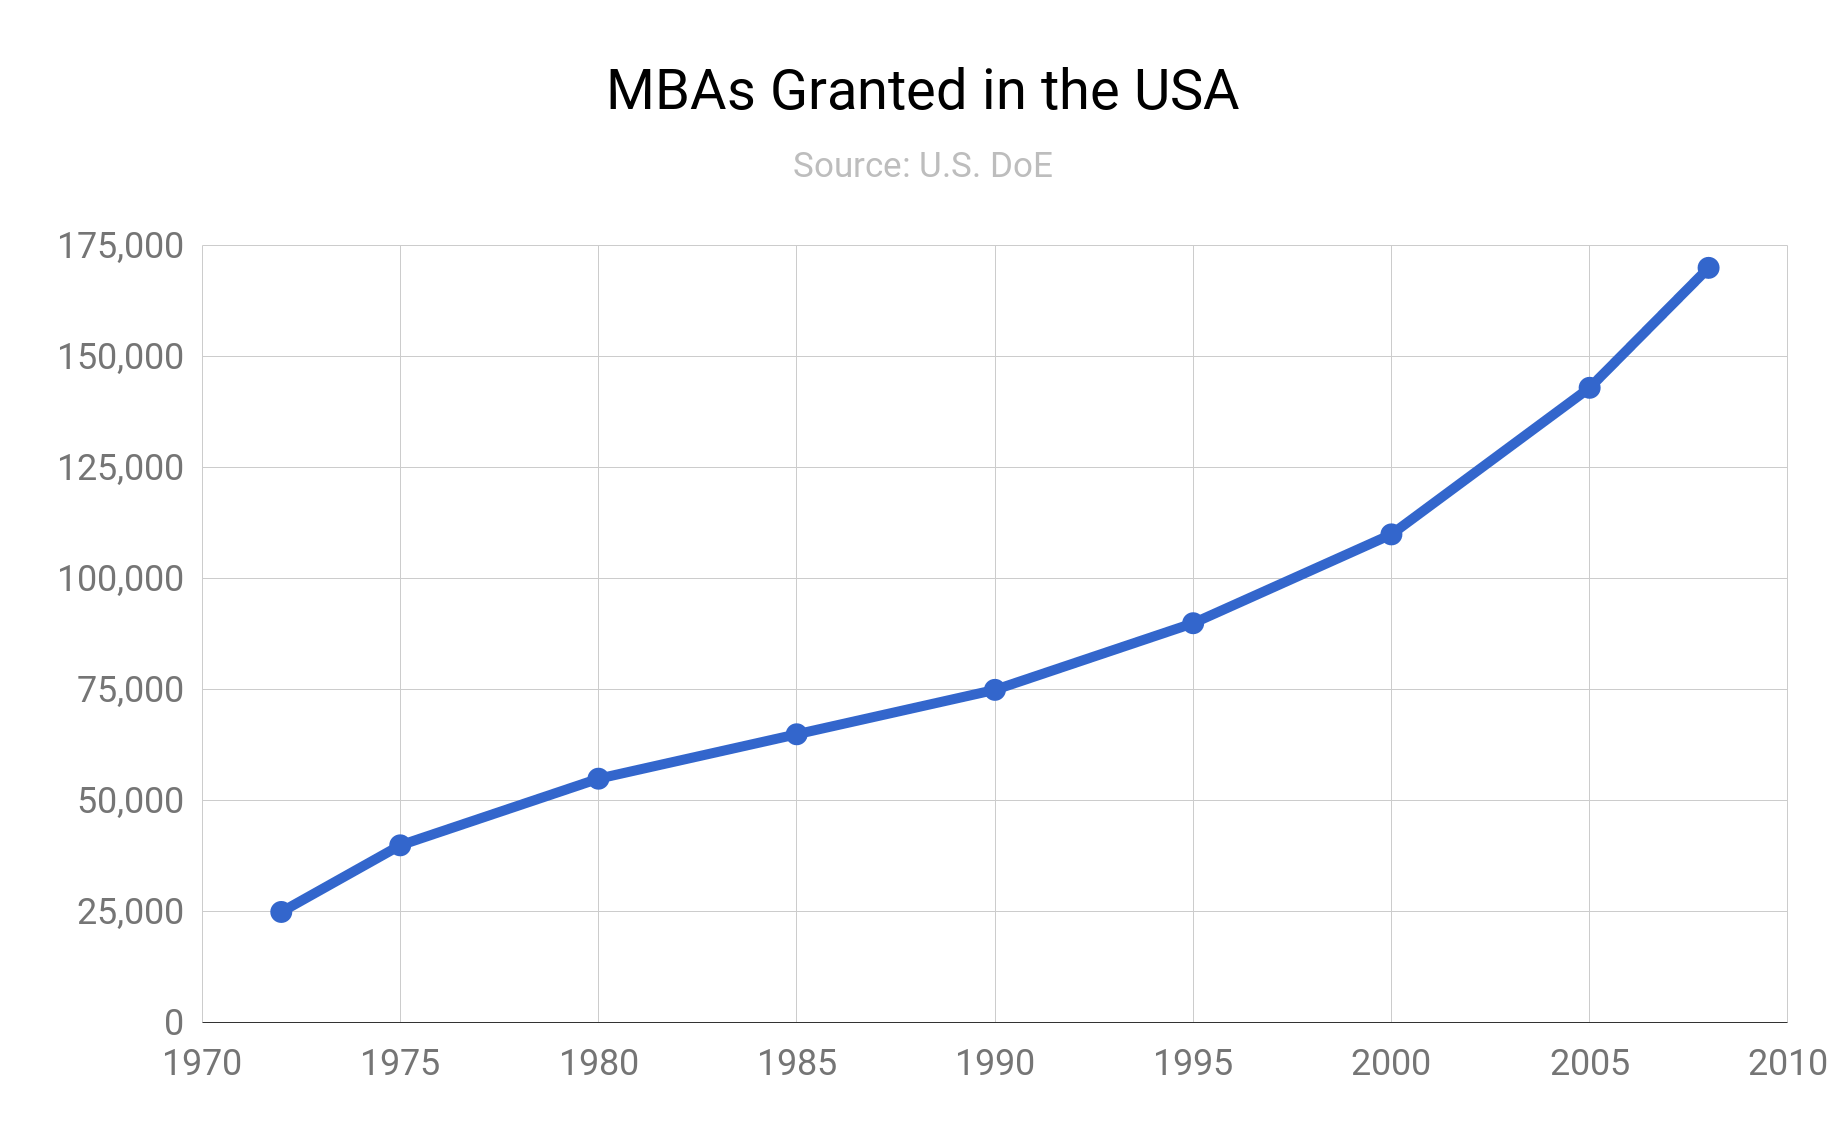 The number of MBAs granted in the US since the 1970s